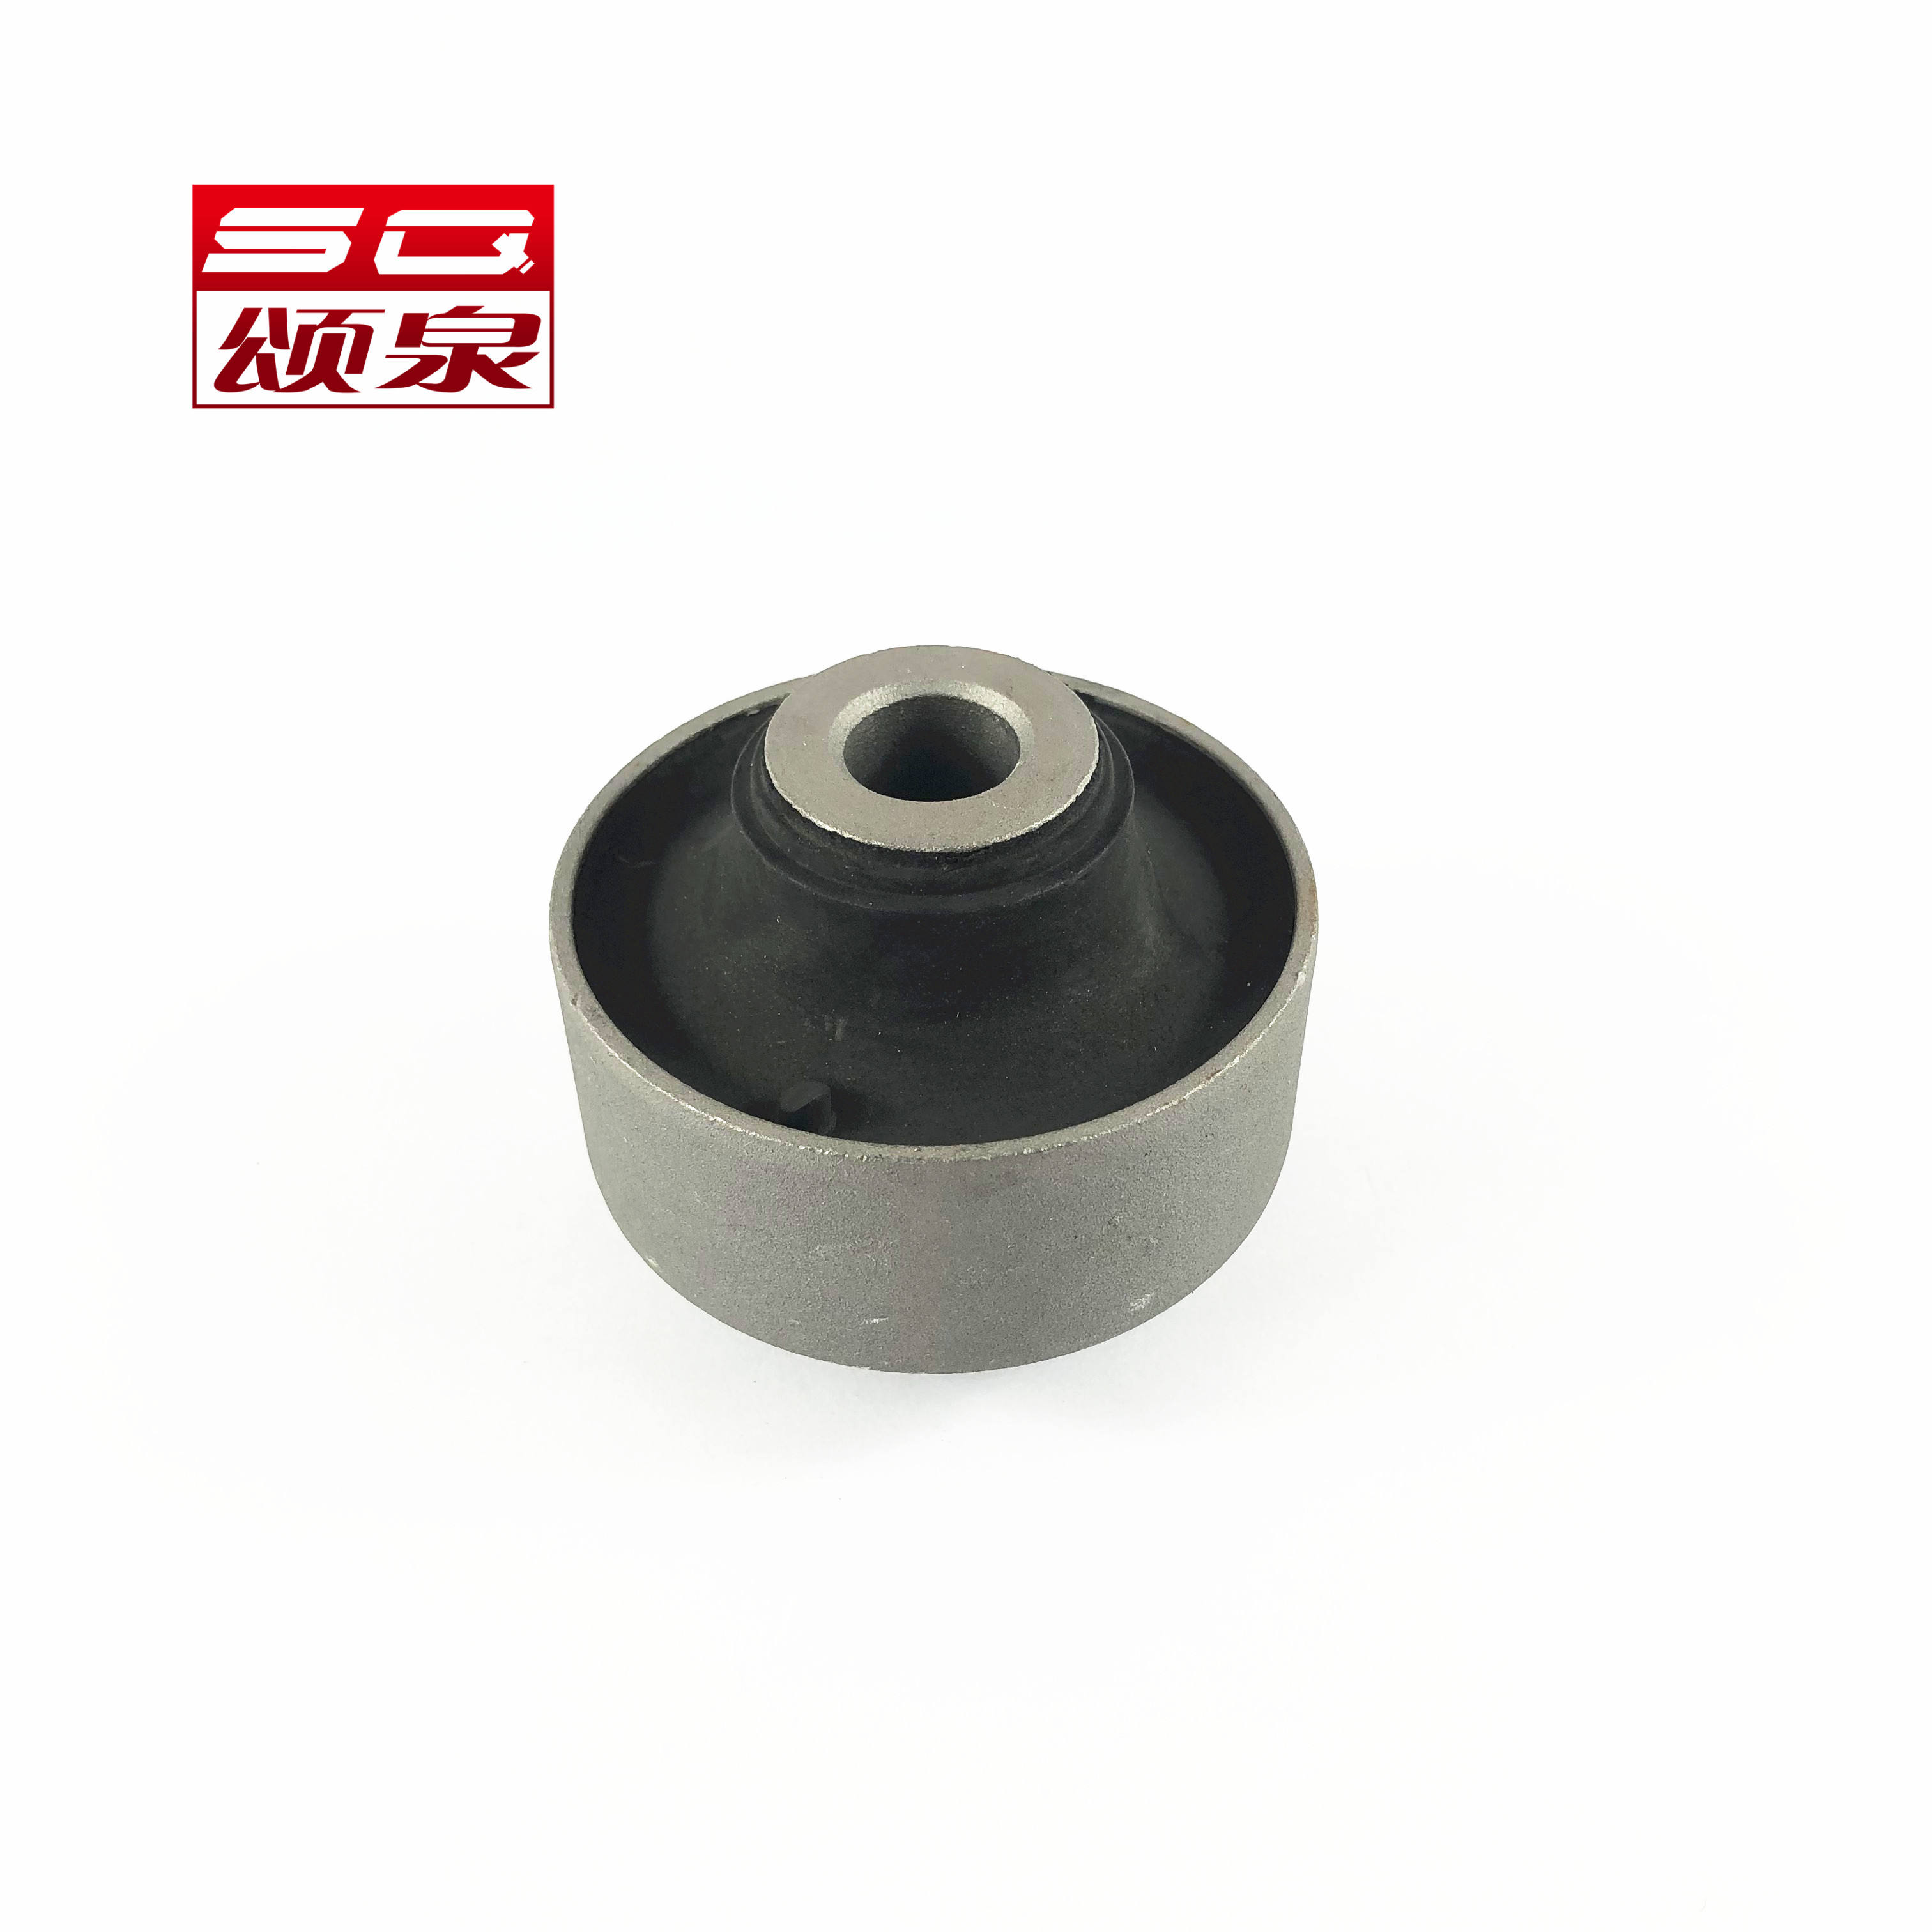 51393-S0X-A02 51393-S3V-A01 High Quality Replacement Suspension Control Arm Bushing for Honda CIVIC VII